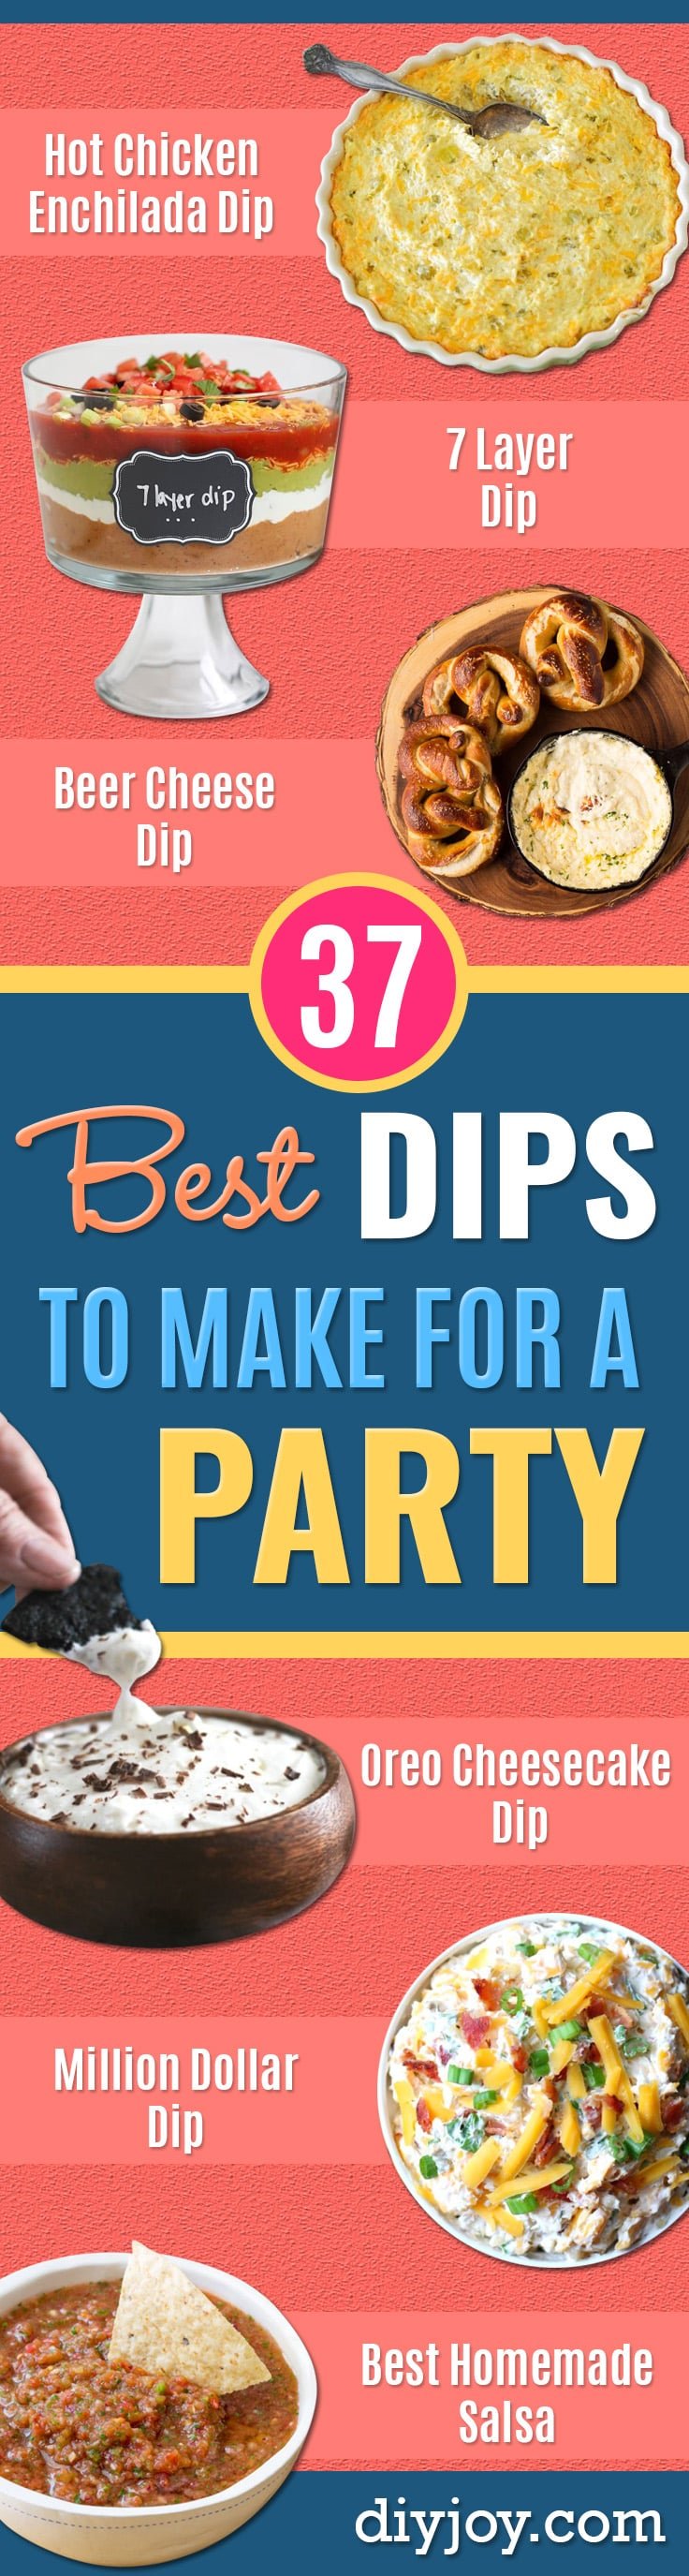 dip recipes - Easy Dips and Recipe Ideas for A Party Appetizer - Cold Recipe Ideas for Chips, Crockpot, Mexican Bean Dip, Desserts and Healthy Fruit Options - Italian Dressing and Ranch Dip Recipe Ideas